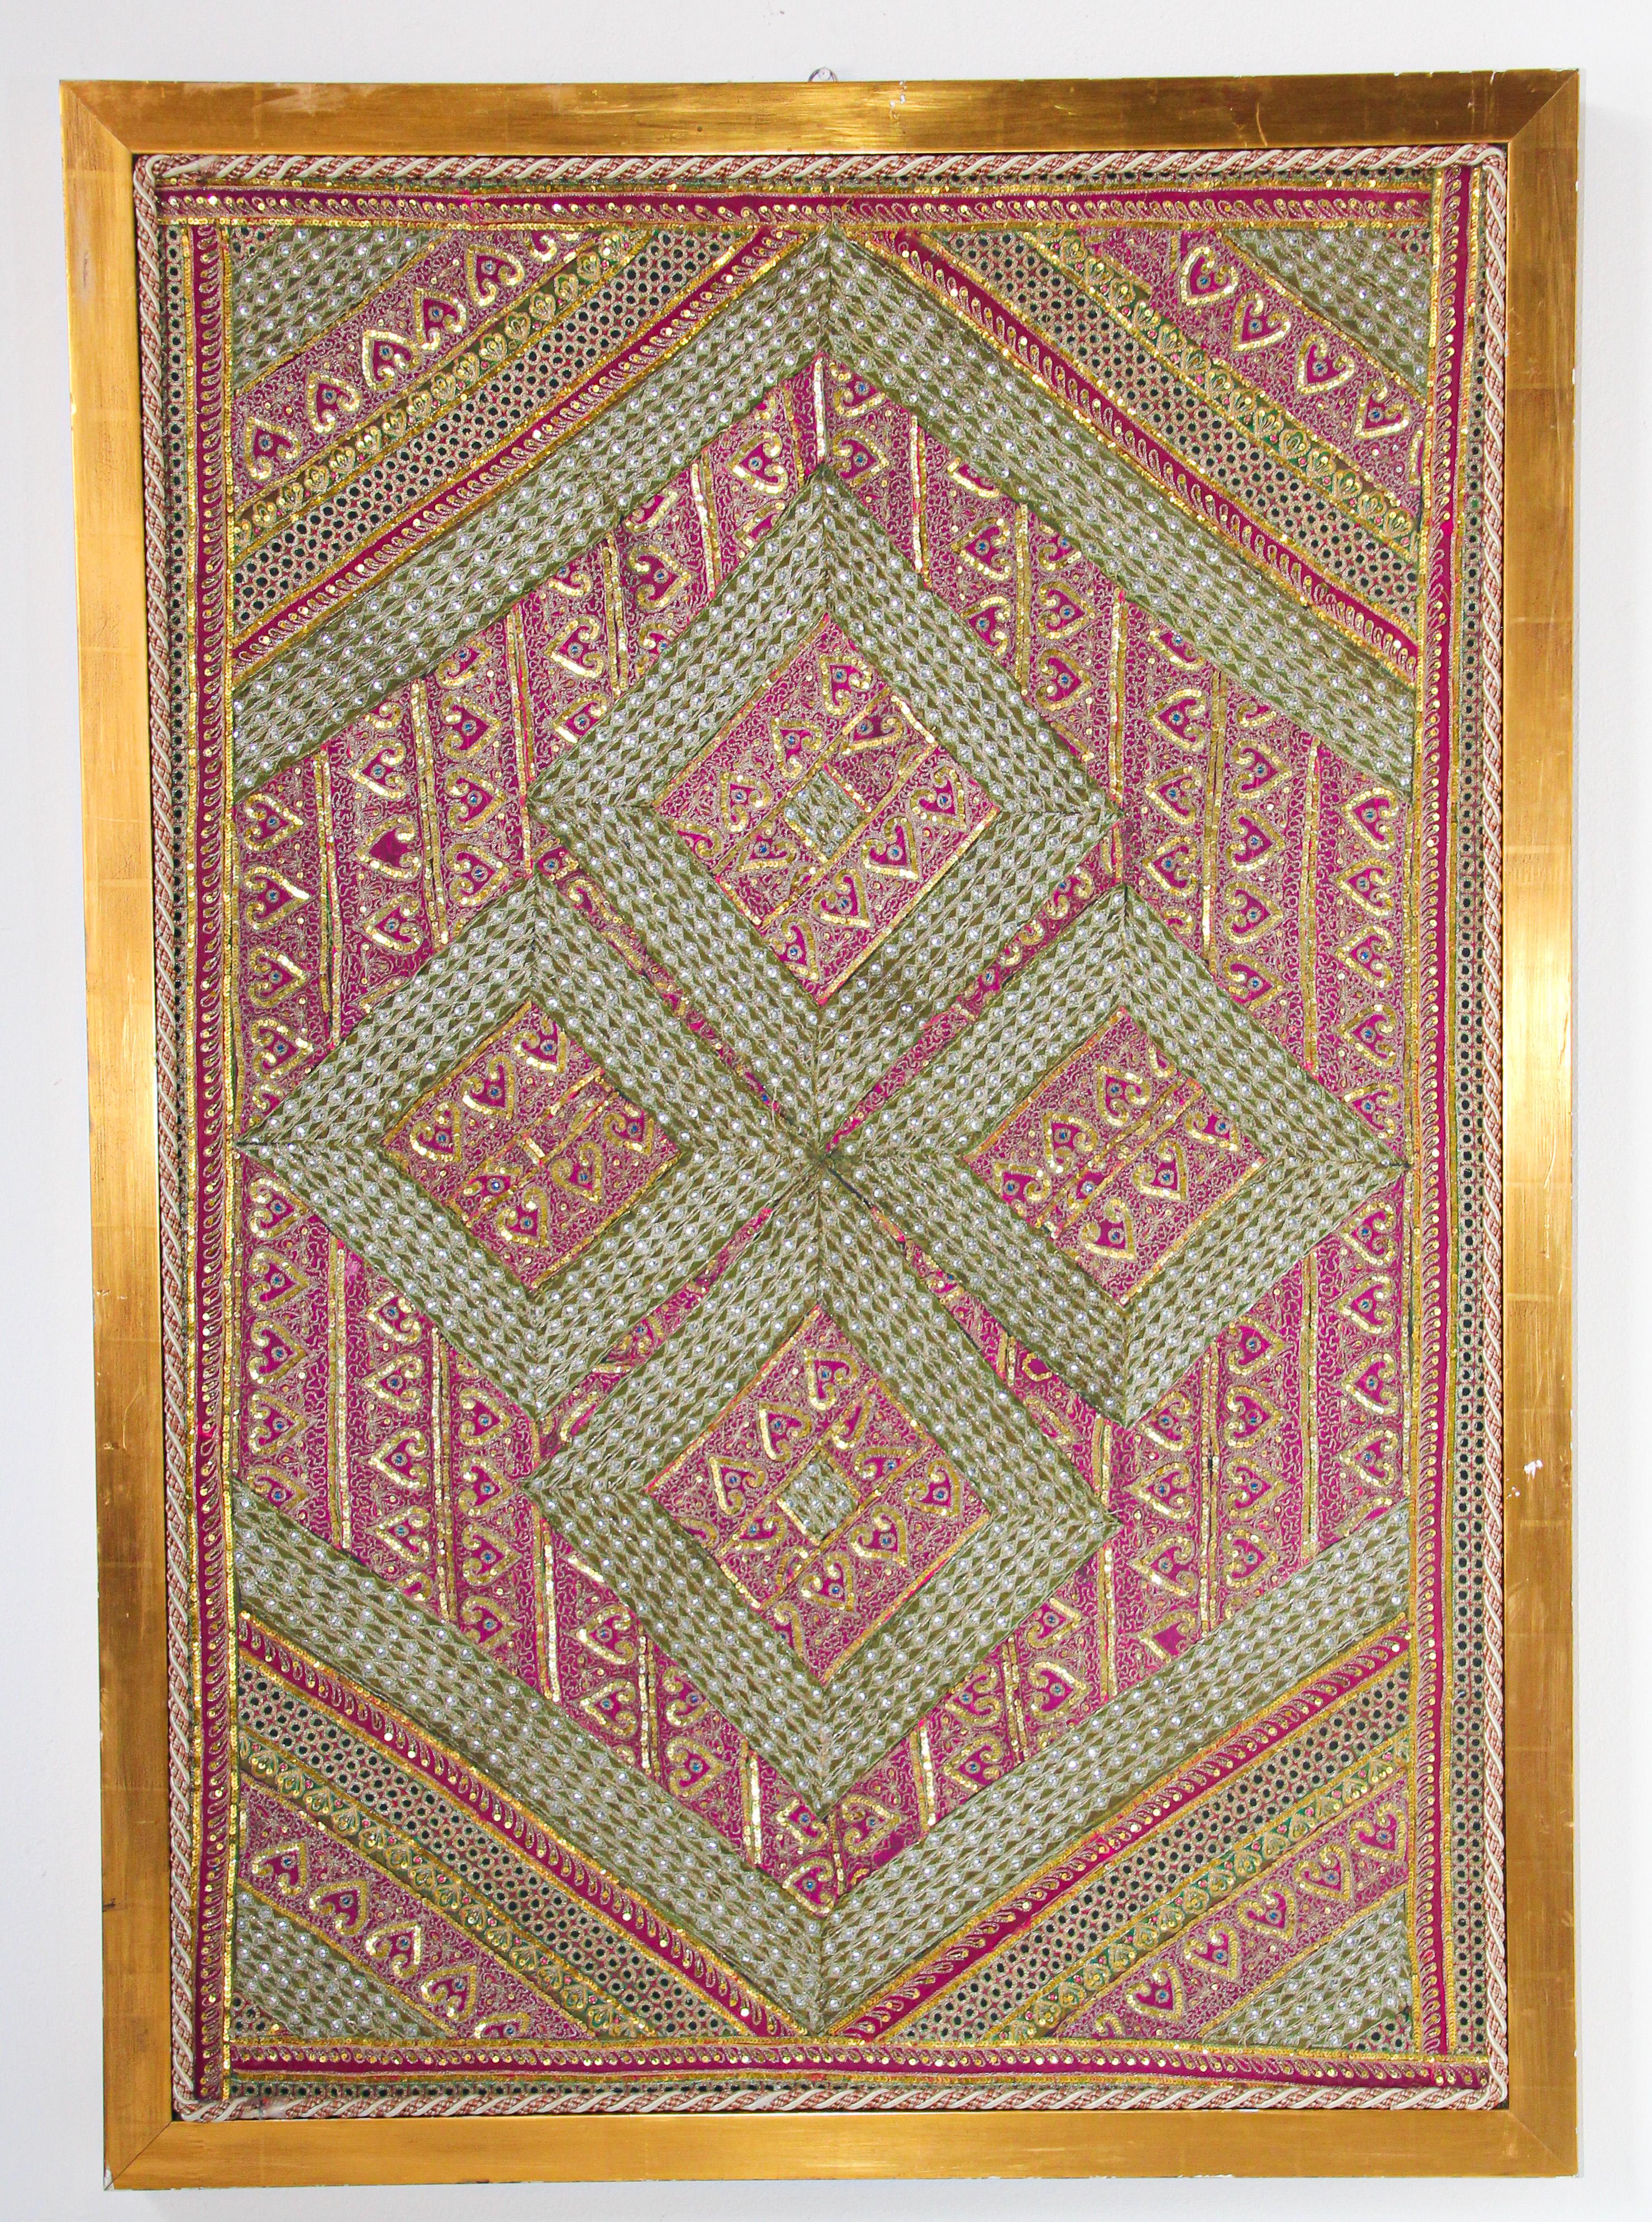 Large hand embroidered and quilted textile from North India.
Mughal style silk and metal threaded tapestry framed from Rajasthan, India
Fanciful Asian folk art design in this distinctive quilt work with a true sense of artistic freedom.
Heavily